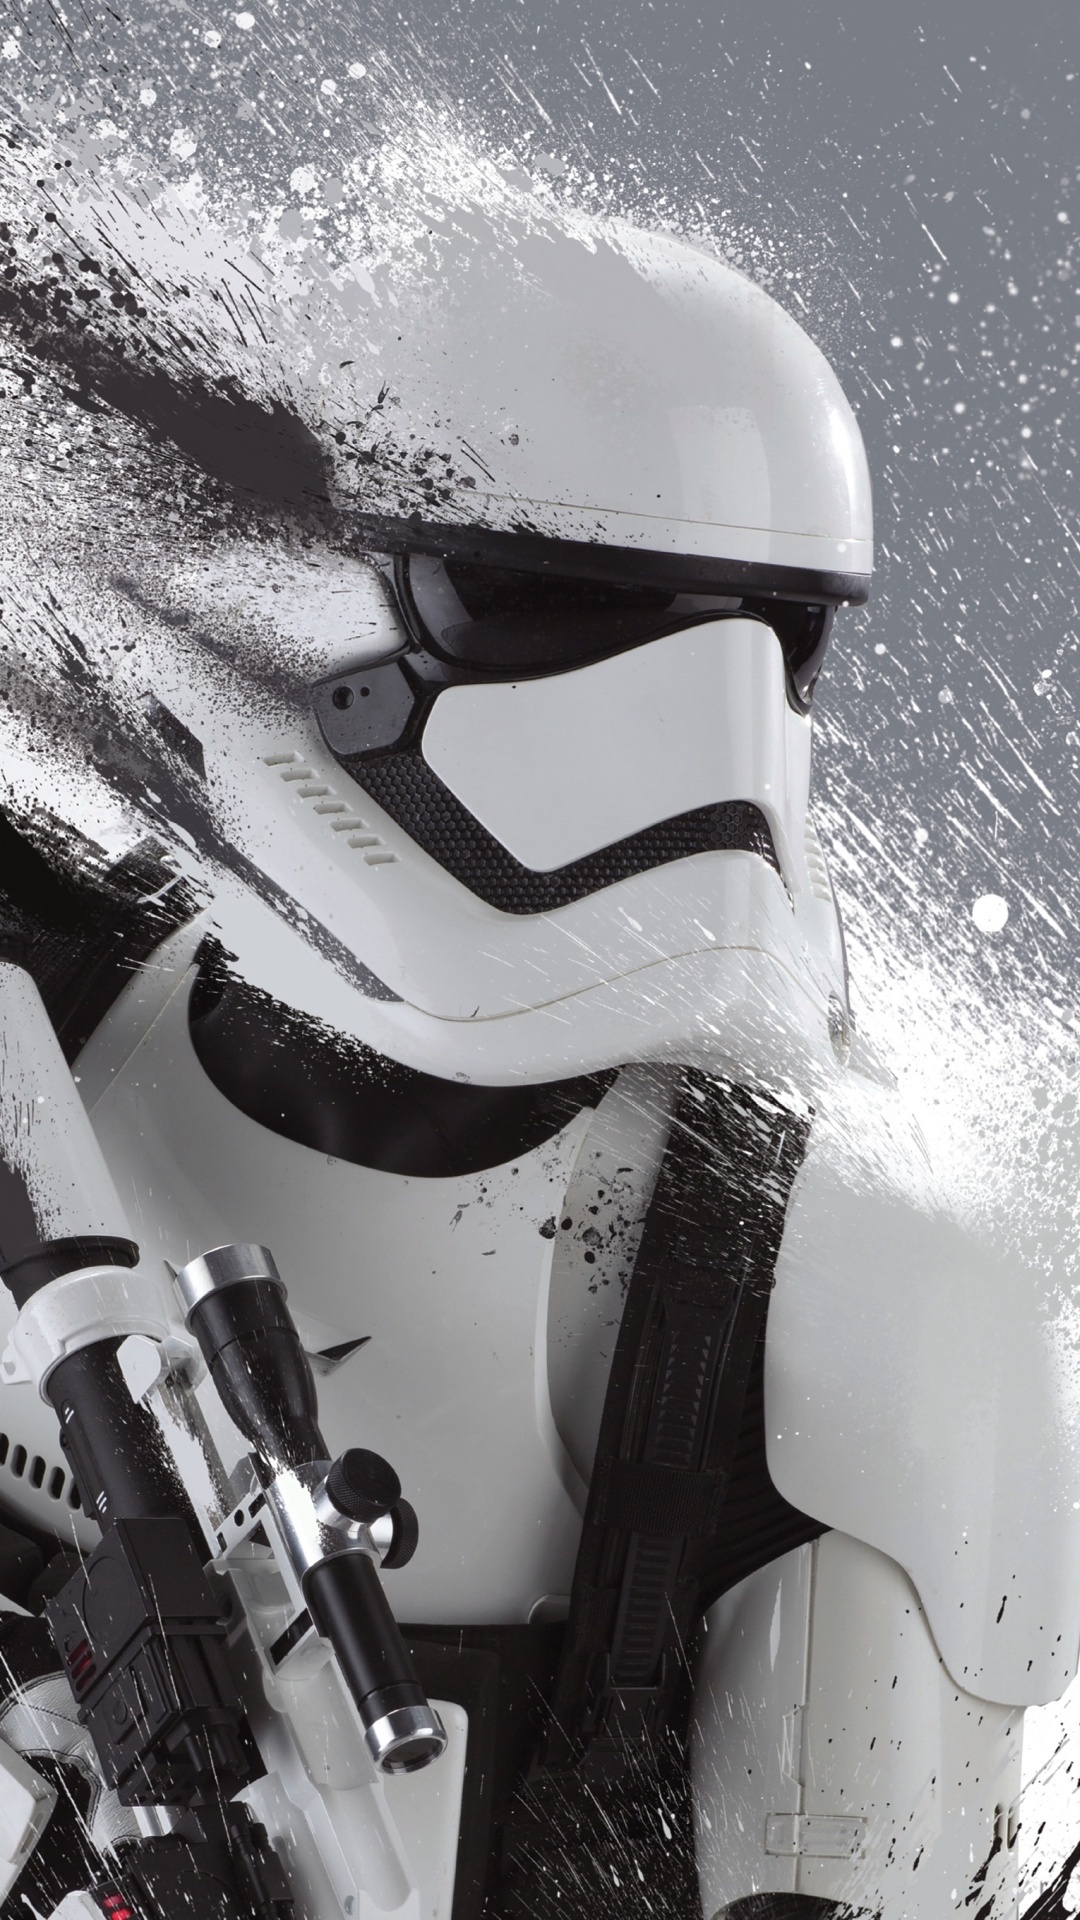 Star Wars The Force Awakens Wallpapers para iPhone